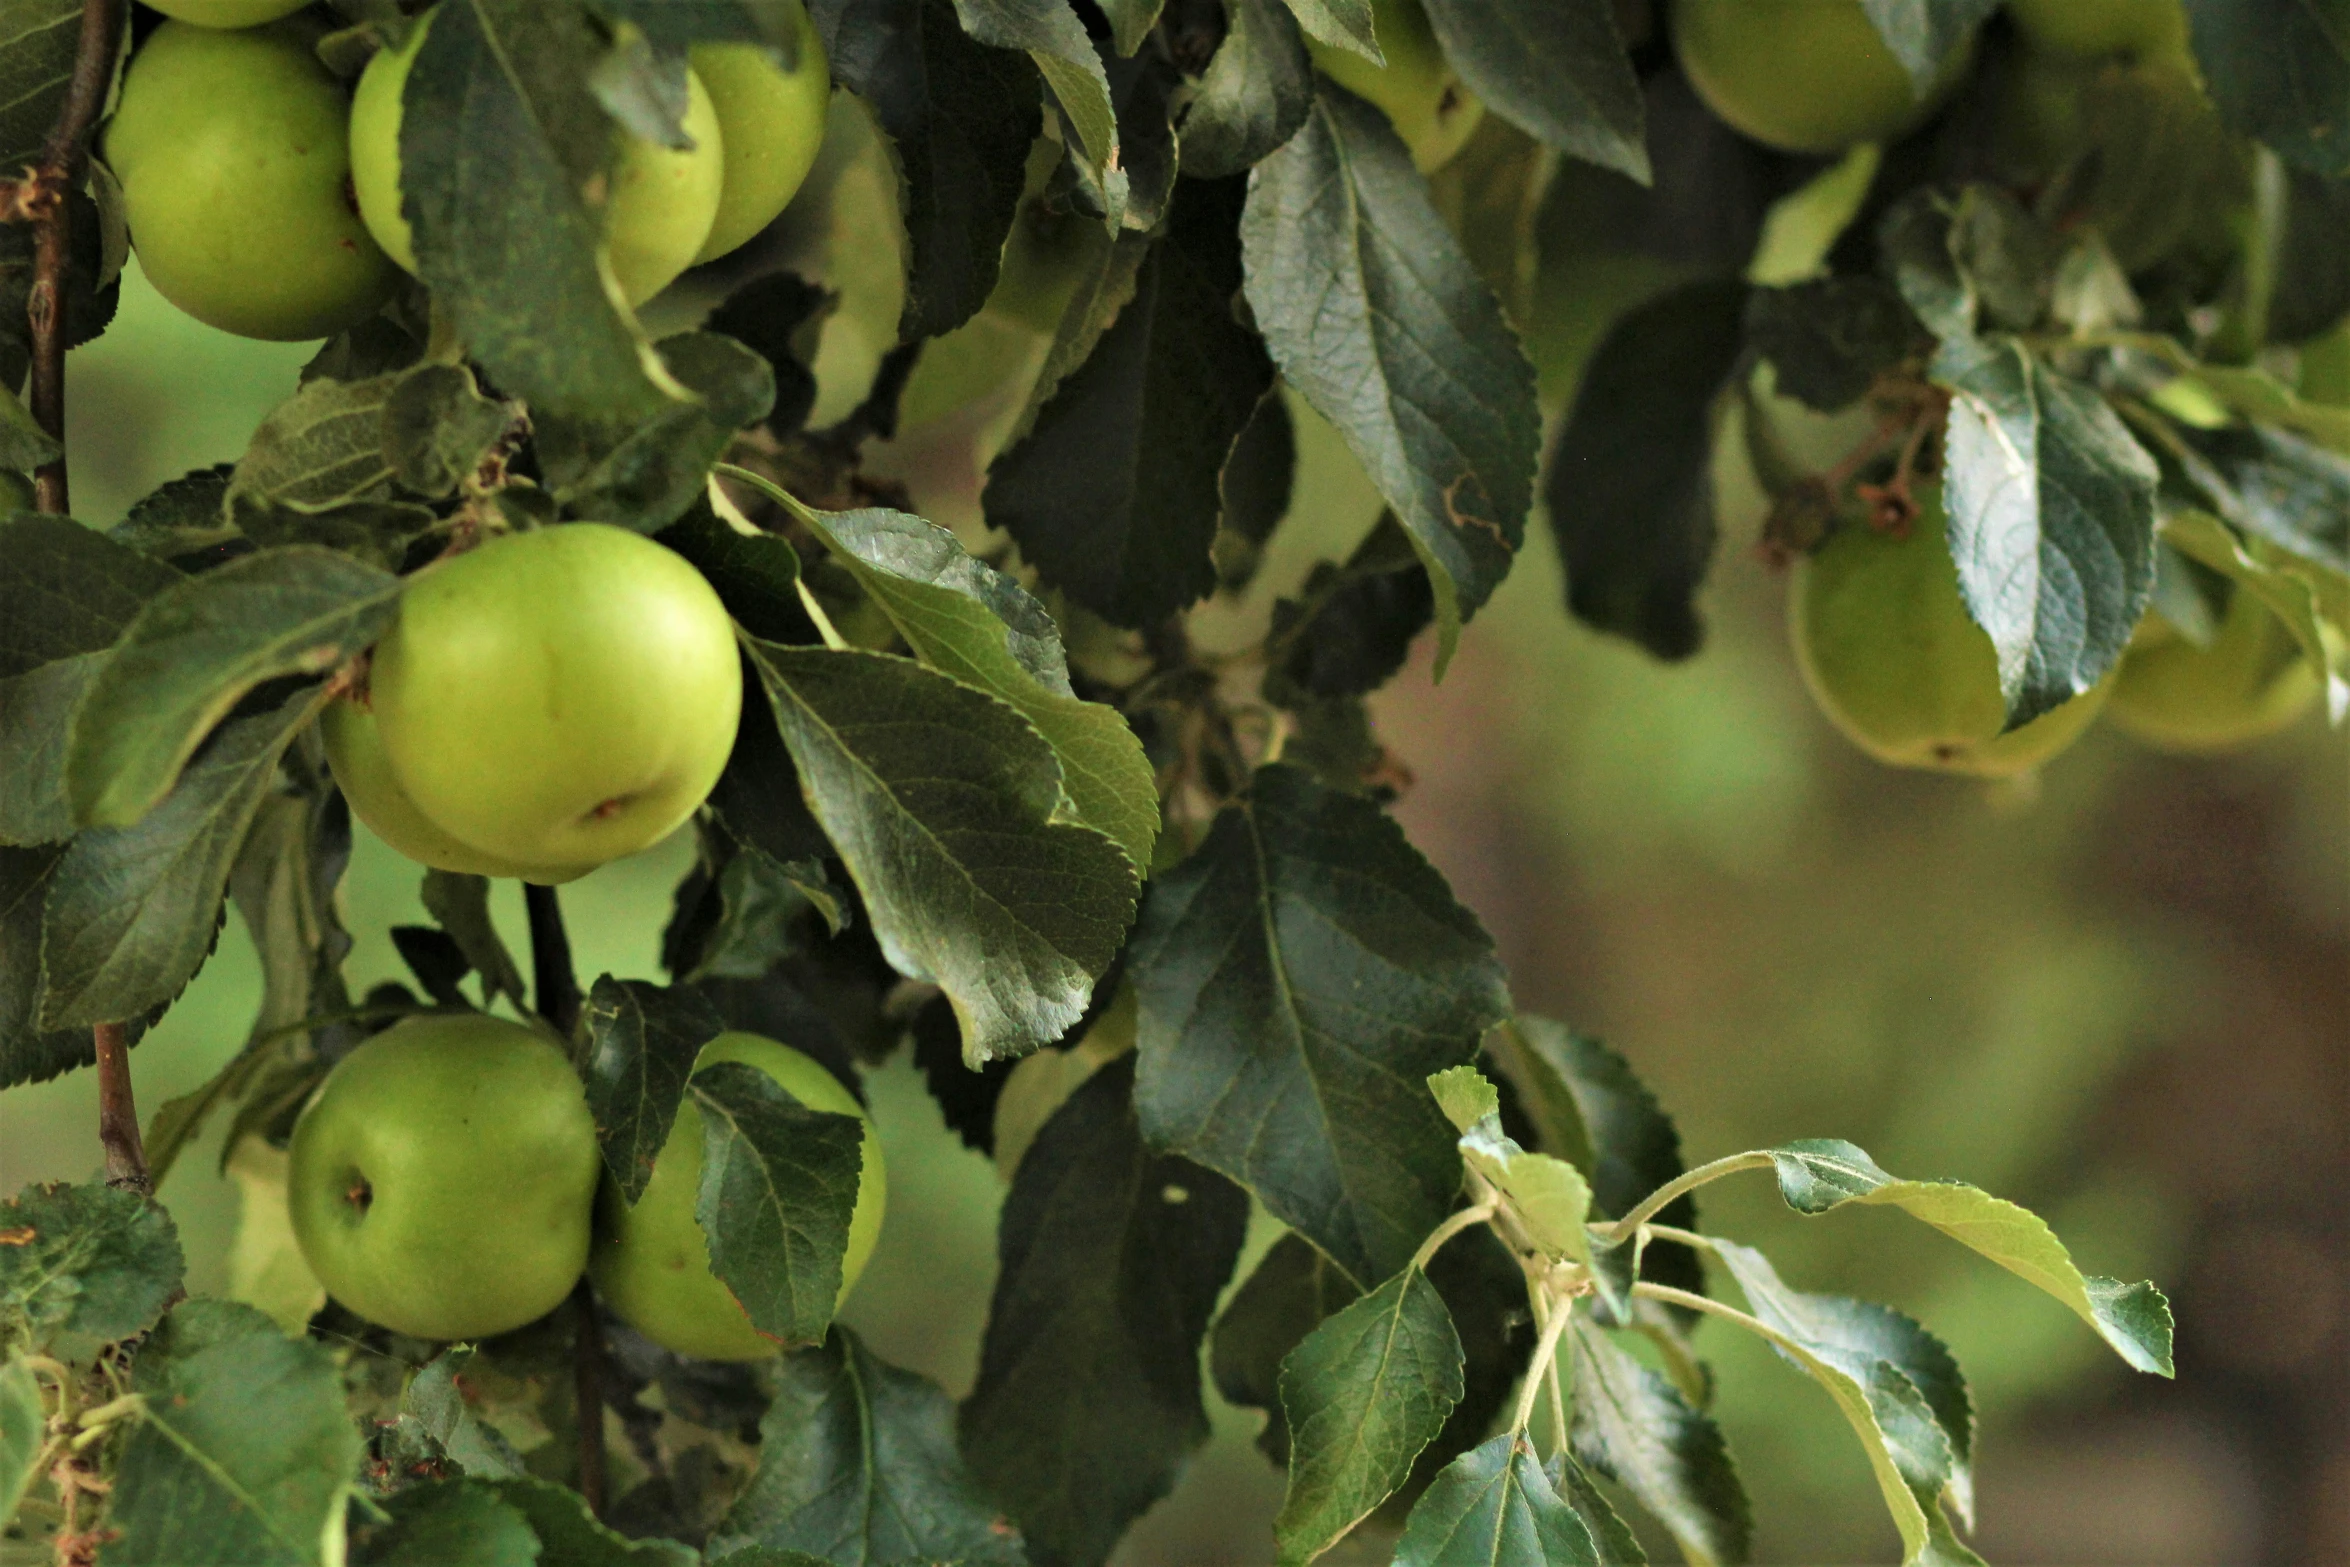 a close up image of the green apples on the tree